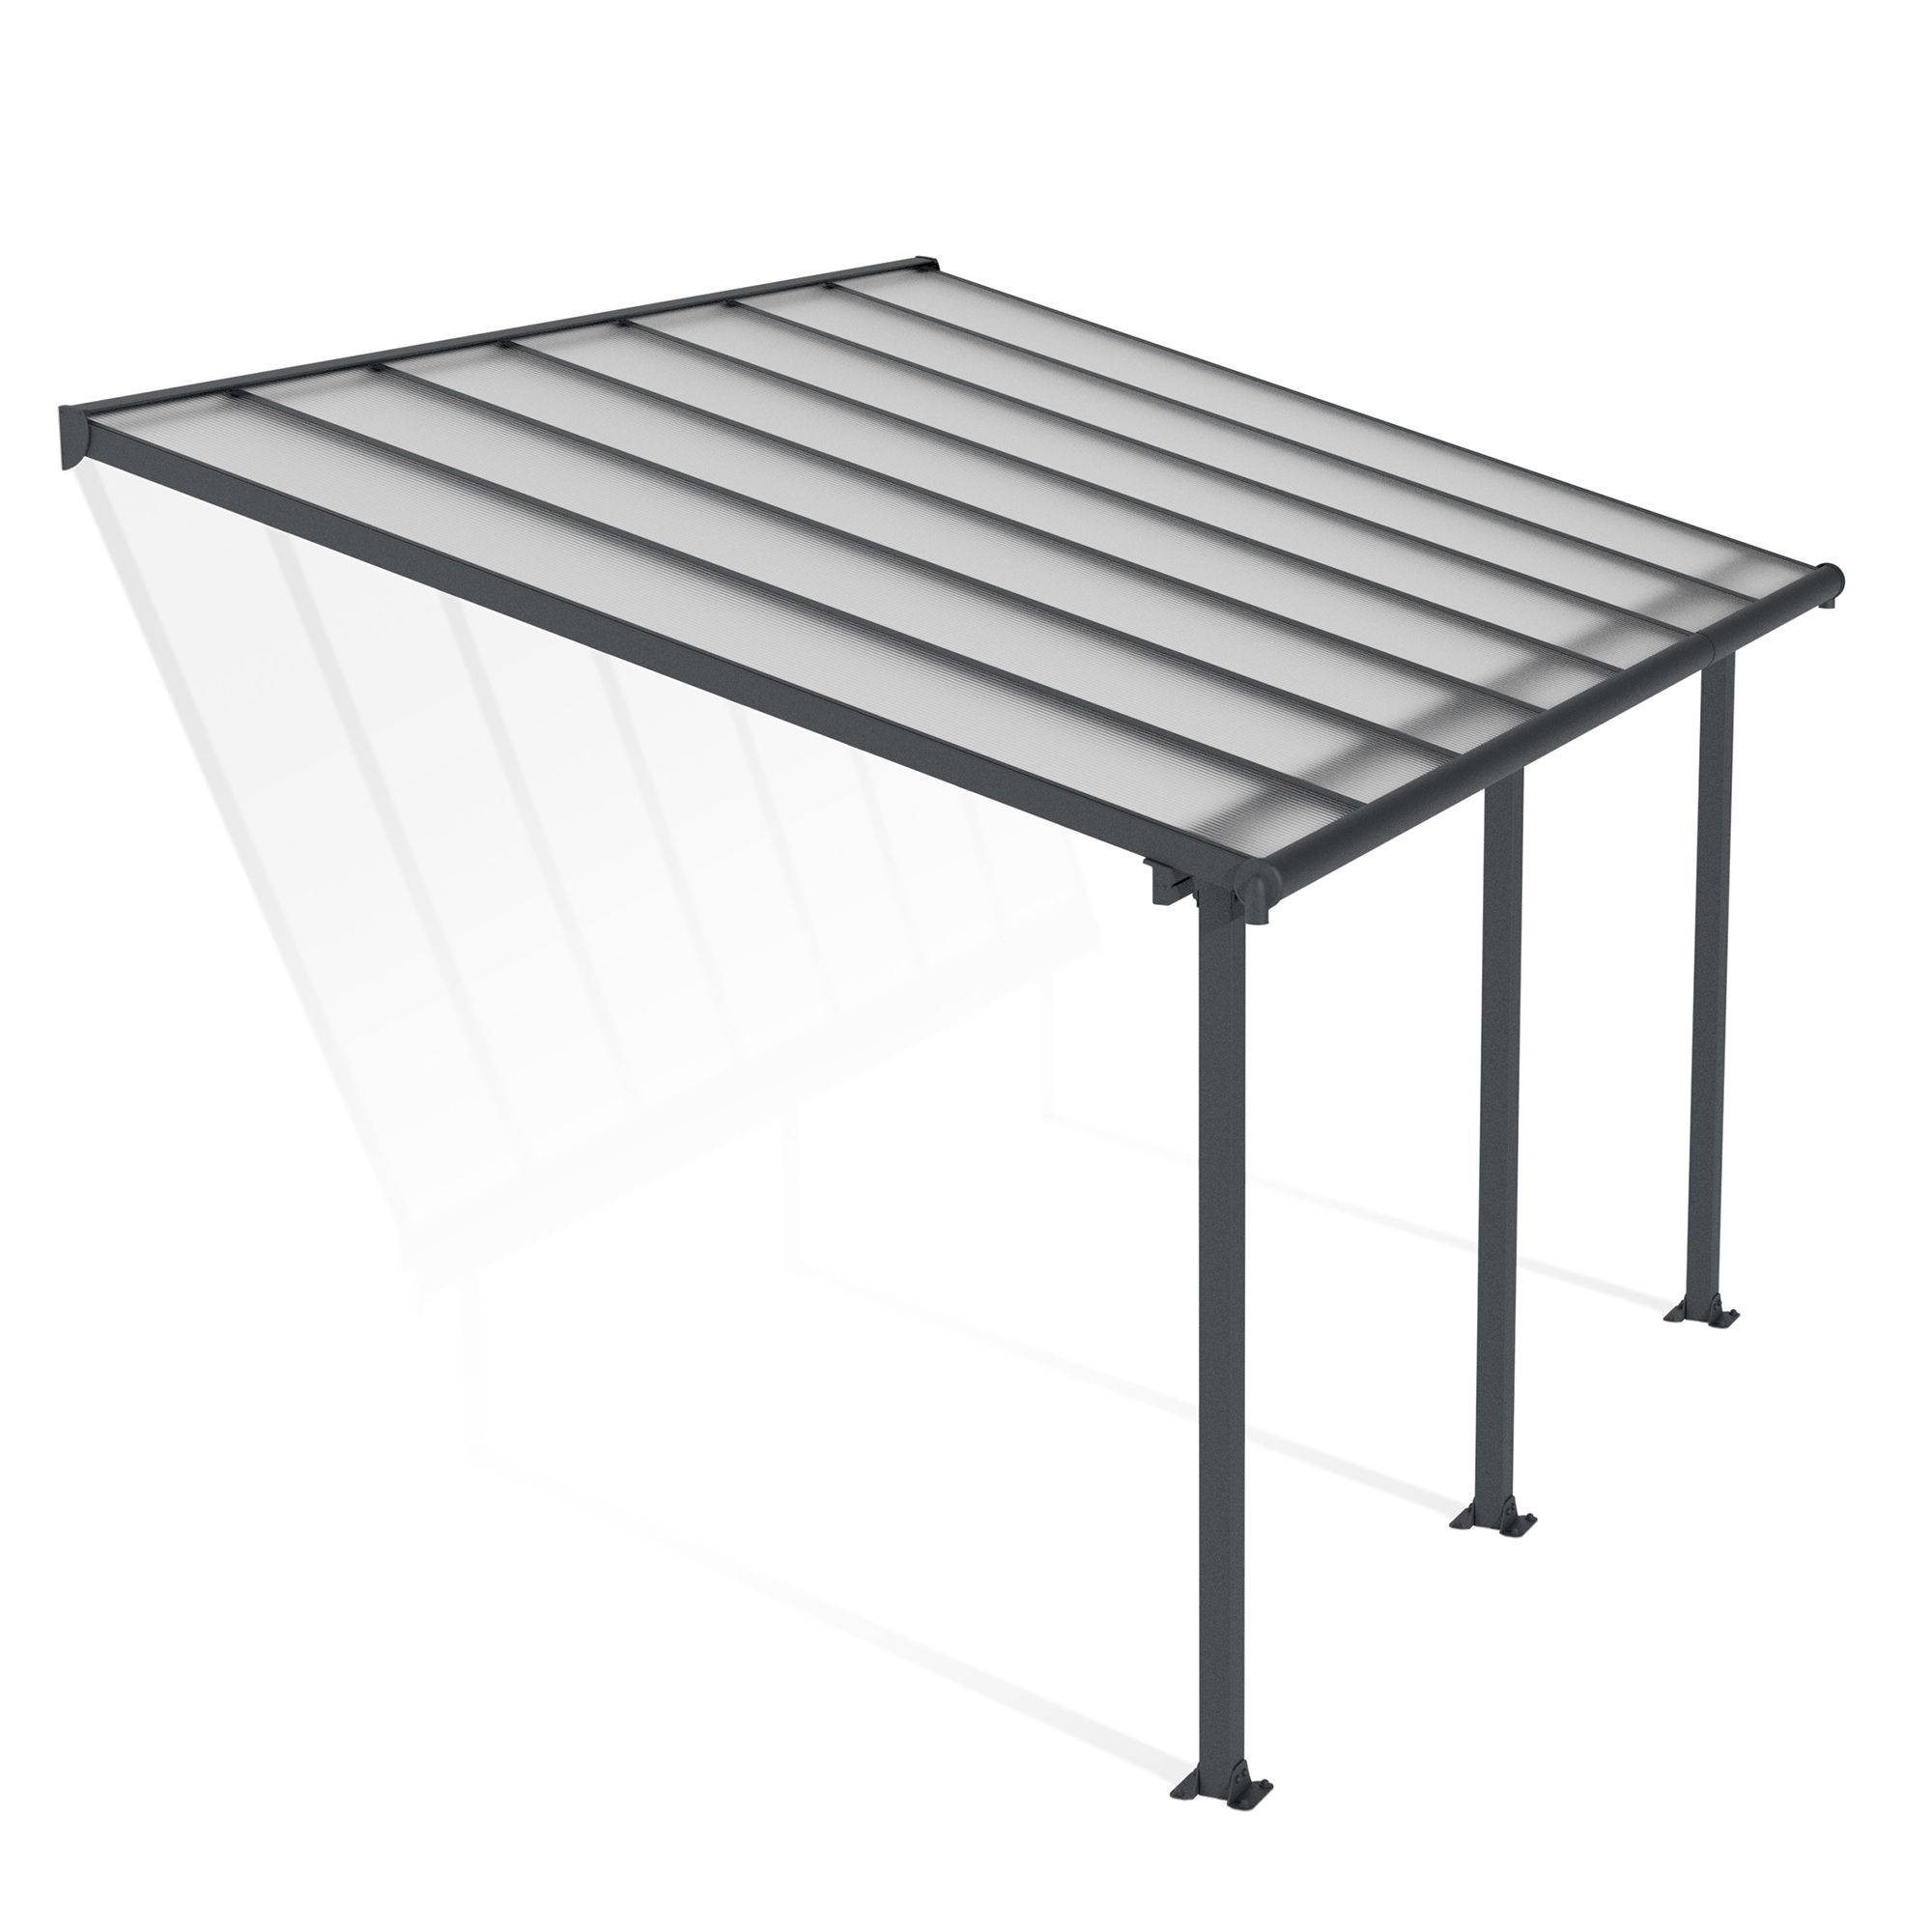 Palram - Canopia Olympia Grey Patio cover (H)3050mm (W)2950mm (D)4250mm